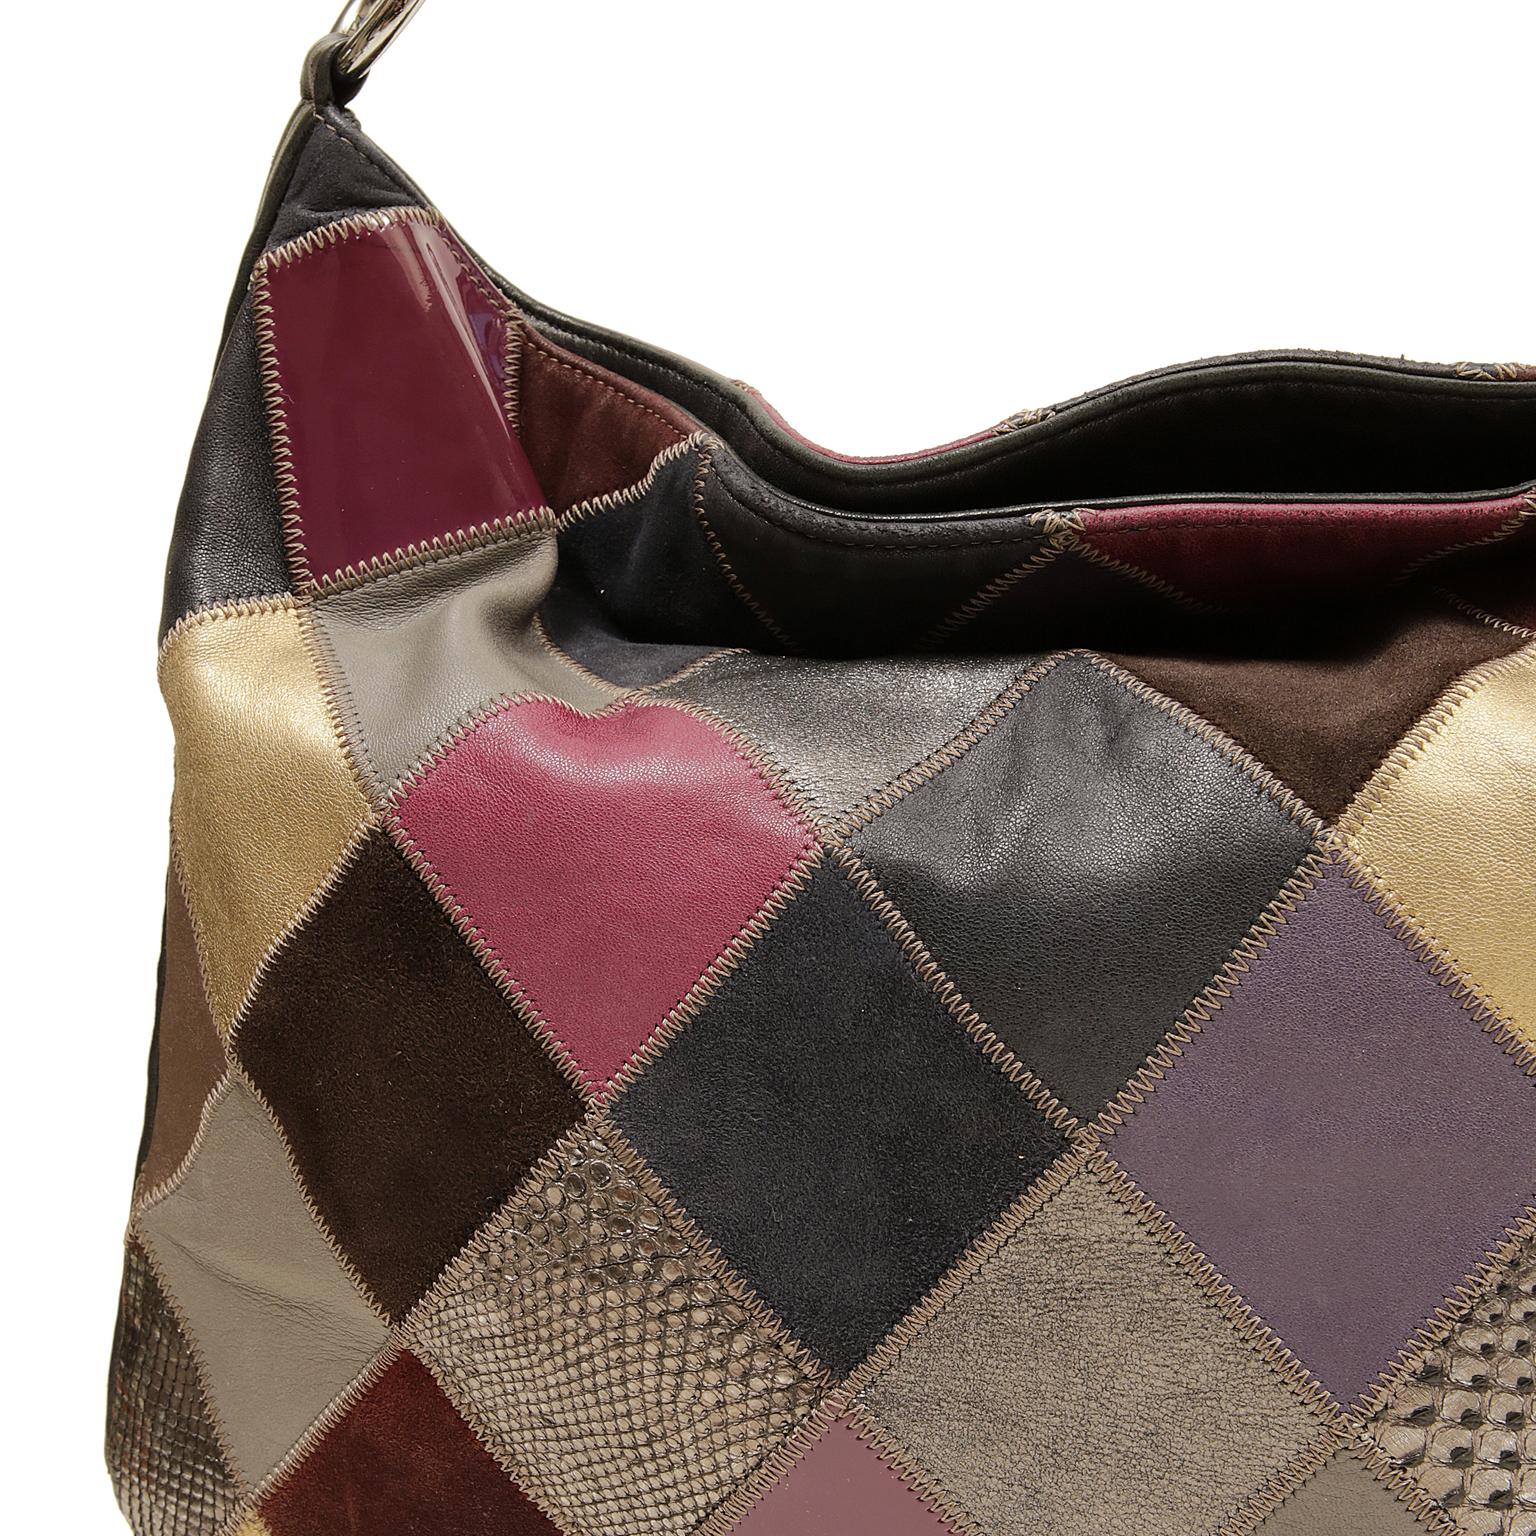 Women's Chanel Multicolor Python Suede Leather Patchwork Hobo